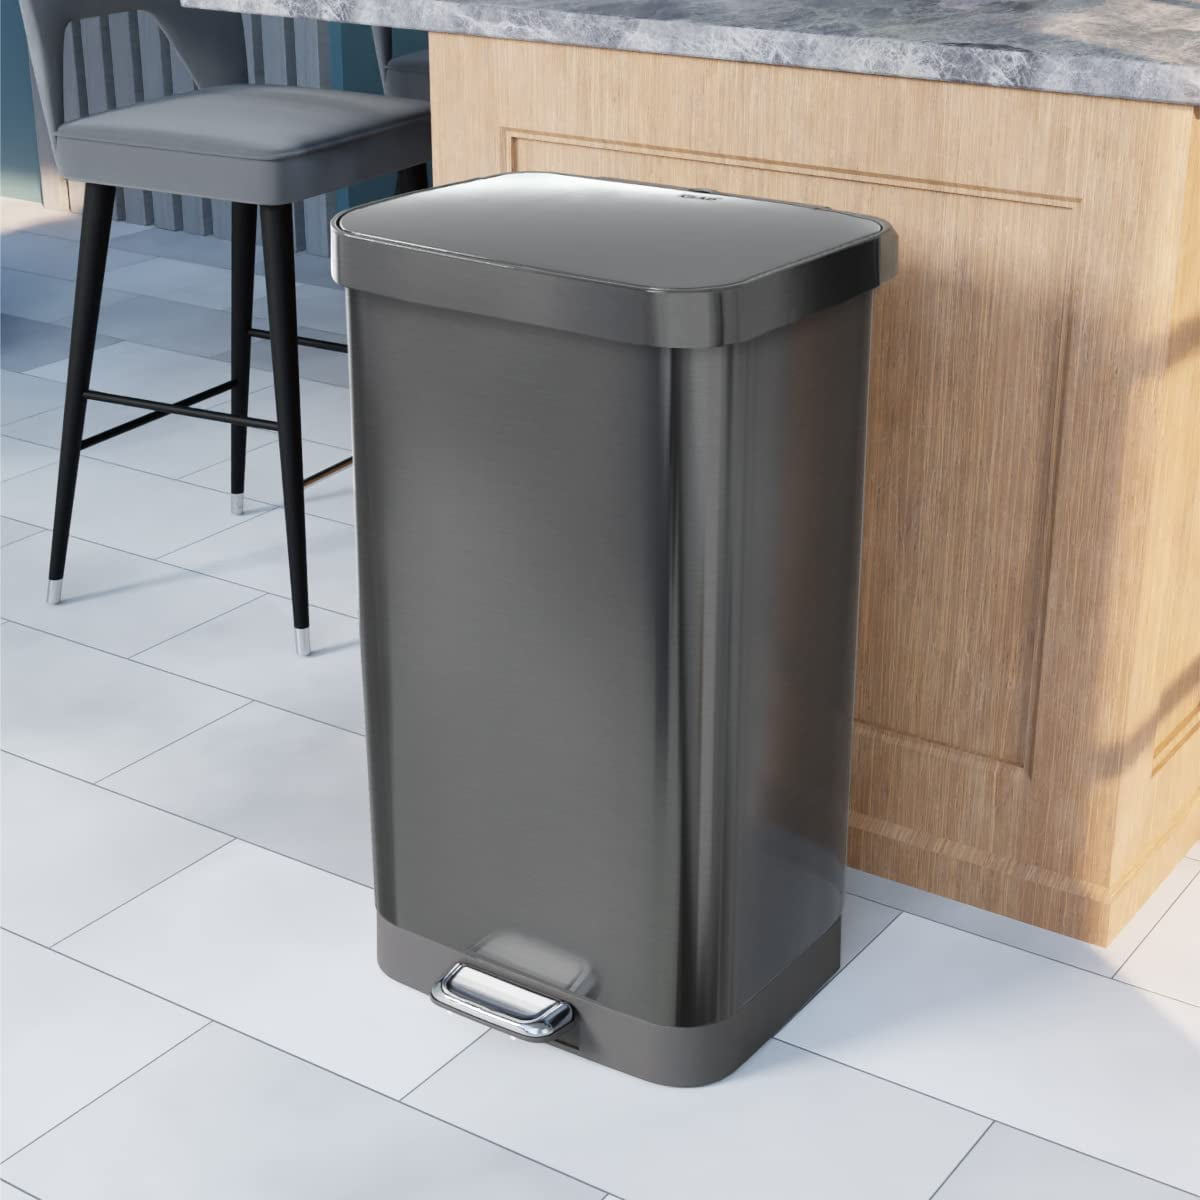 Glad Stainless Steel Step Trash Can with Clorox Odor Protection | Large  Metal Kitchen Garbage Bin with Soft Close Lid, Foot Pedal and Waste Bag  Roll